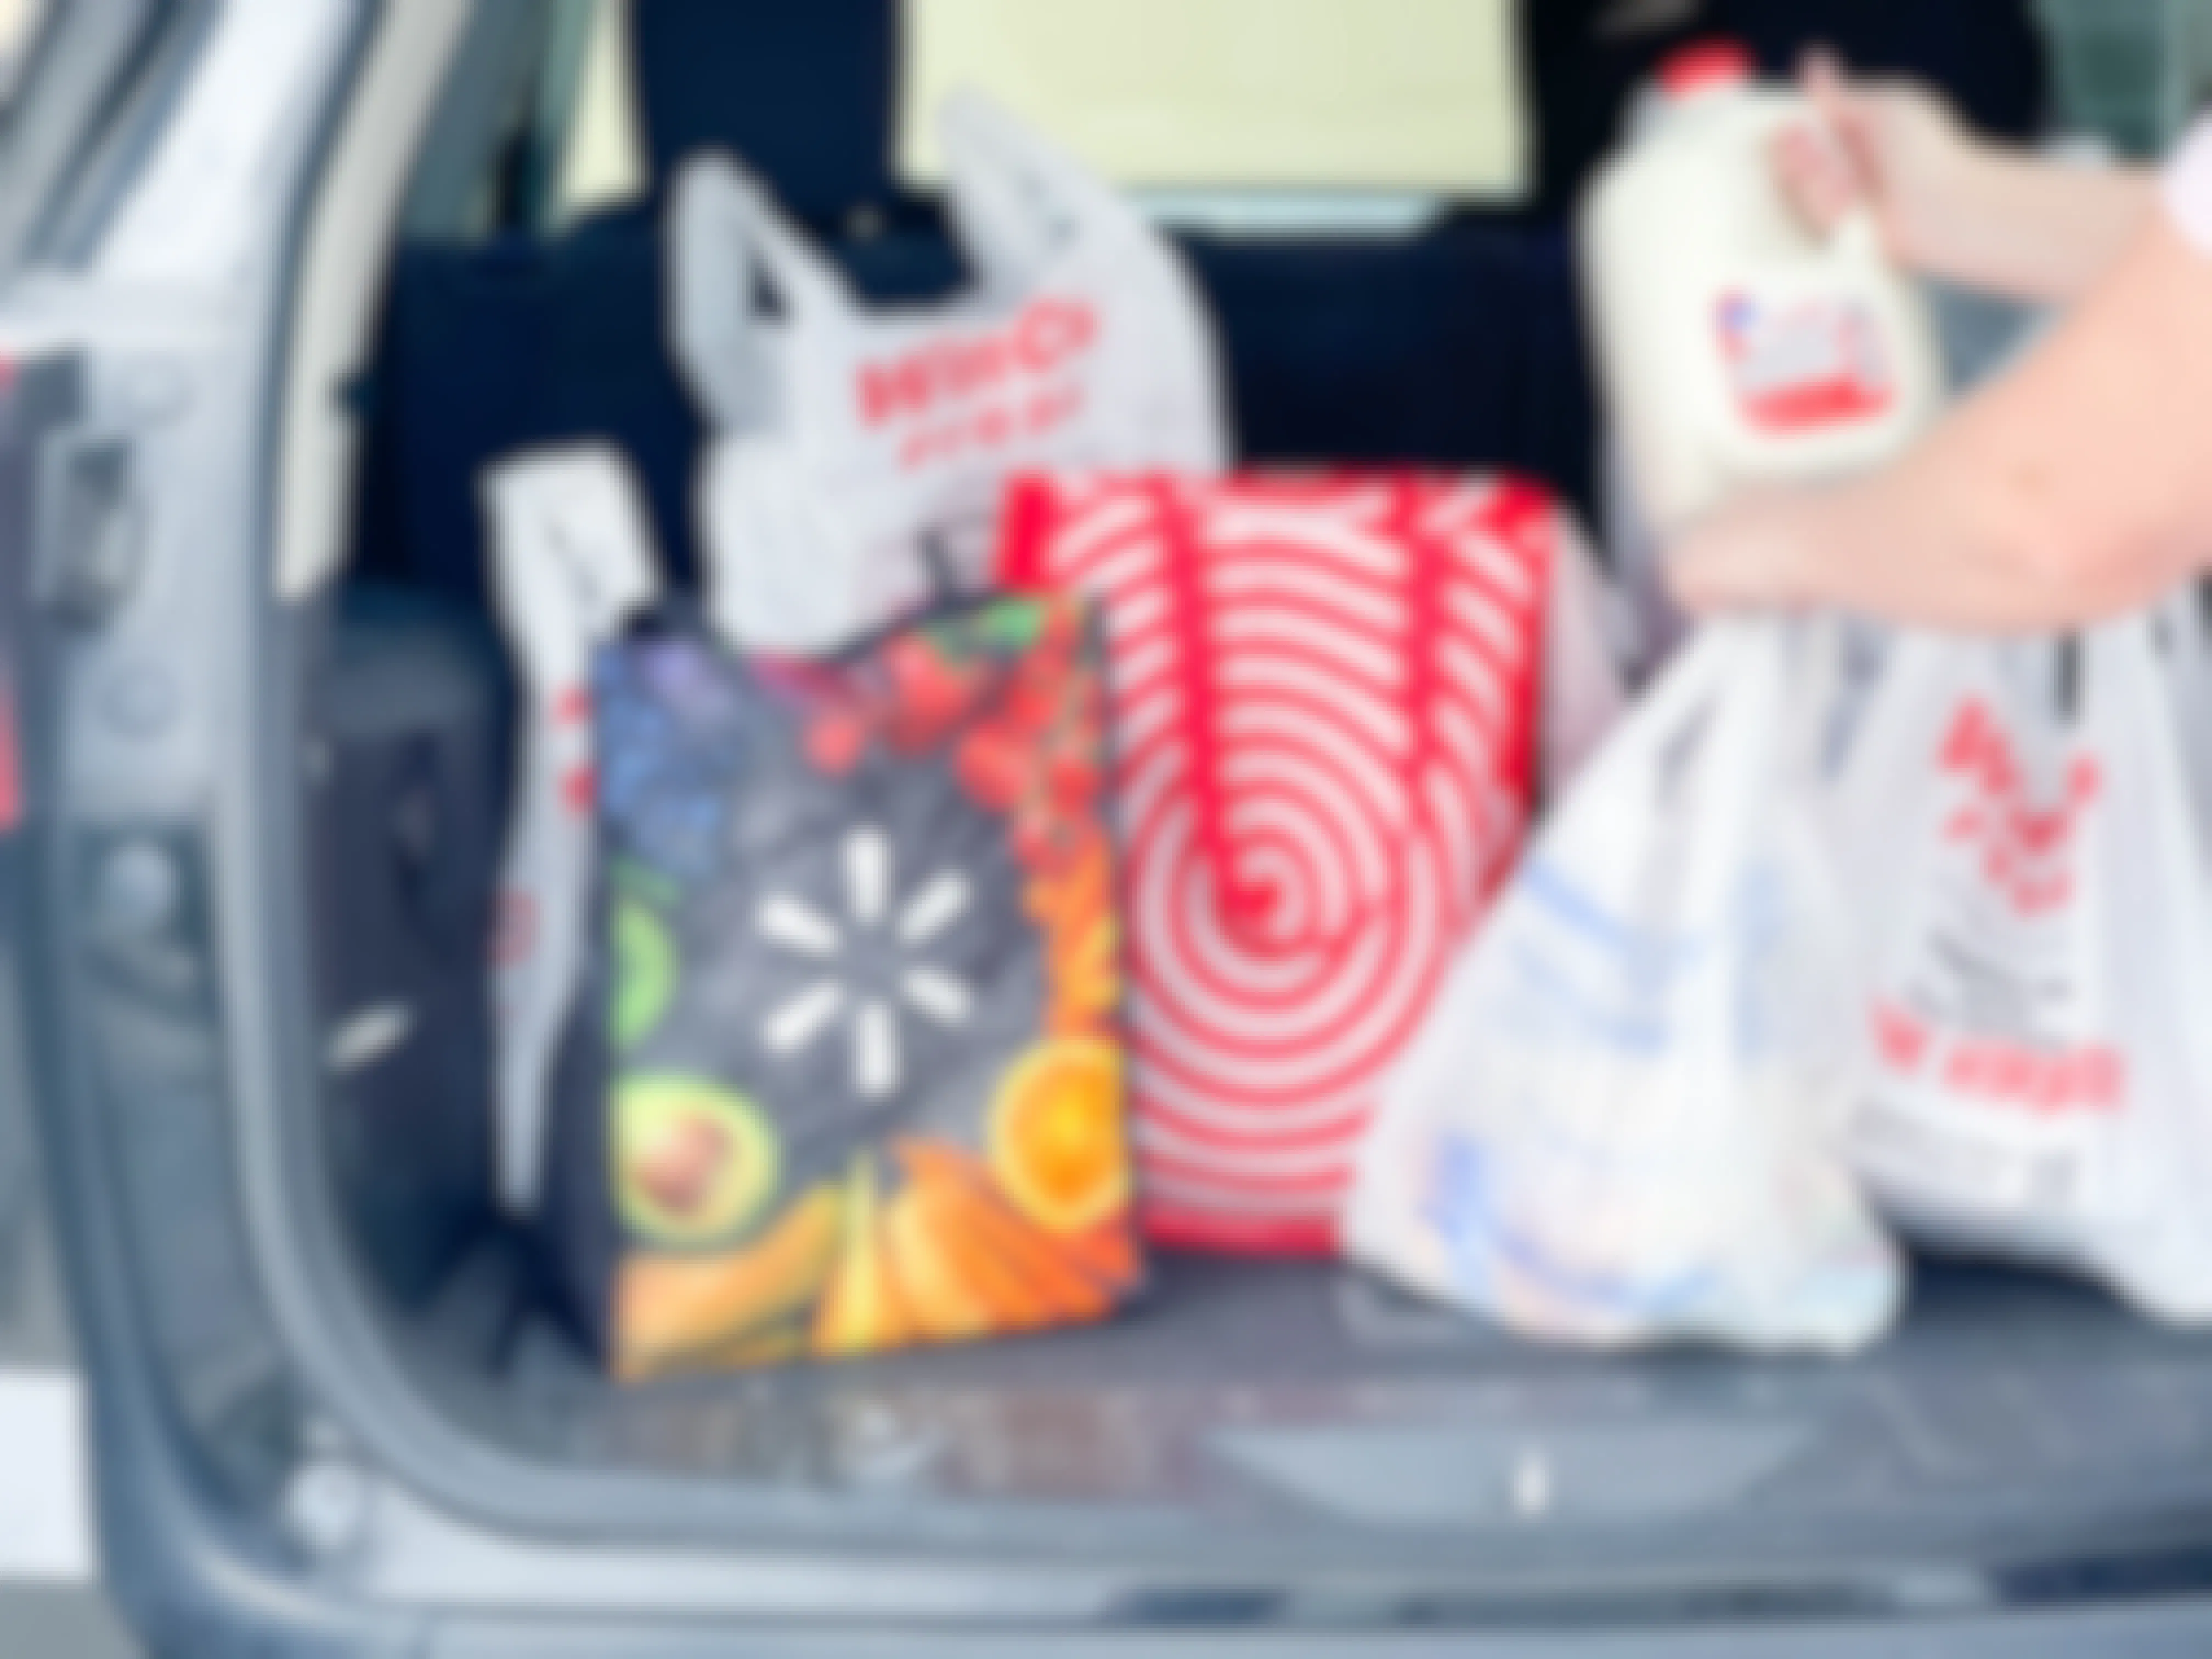 A person putting a gallon of milk into the trunk of a vehicle with reusable and plastic grocery bags from Walmart, Target, and WinCo Foods.